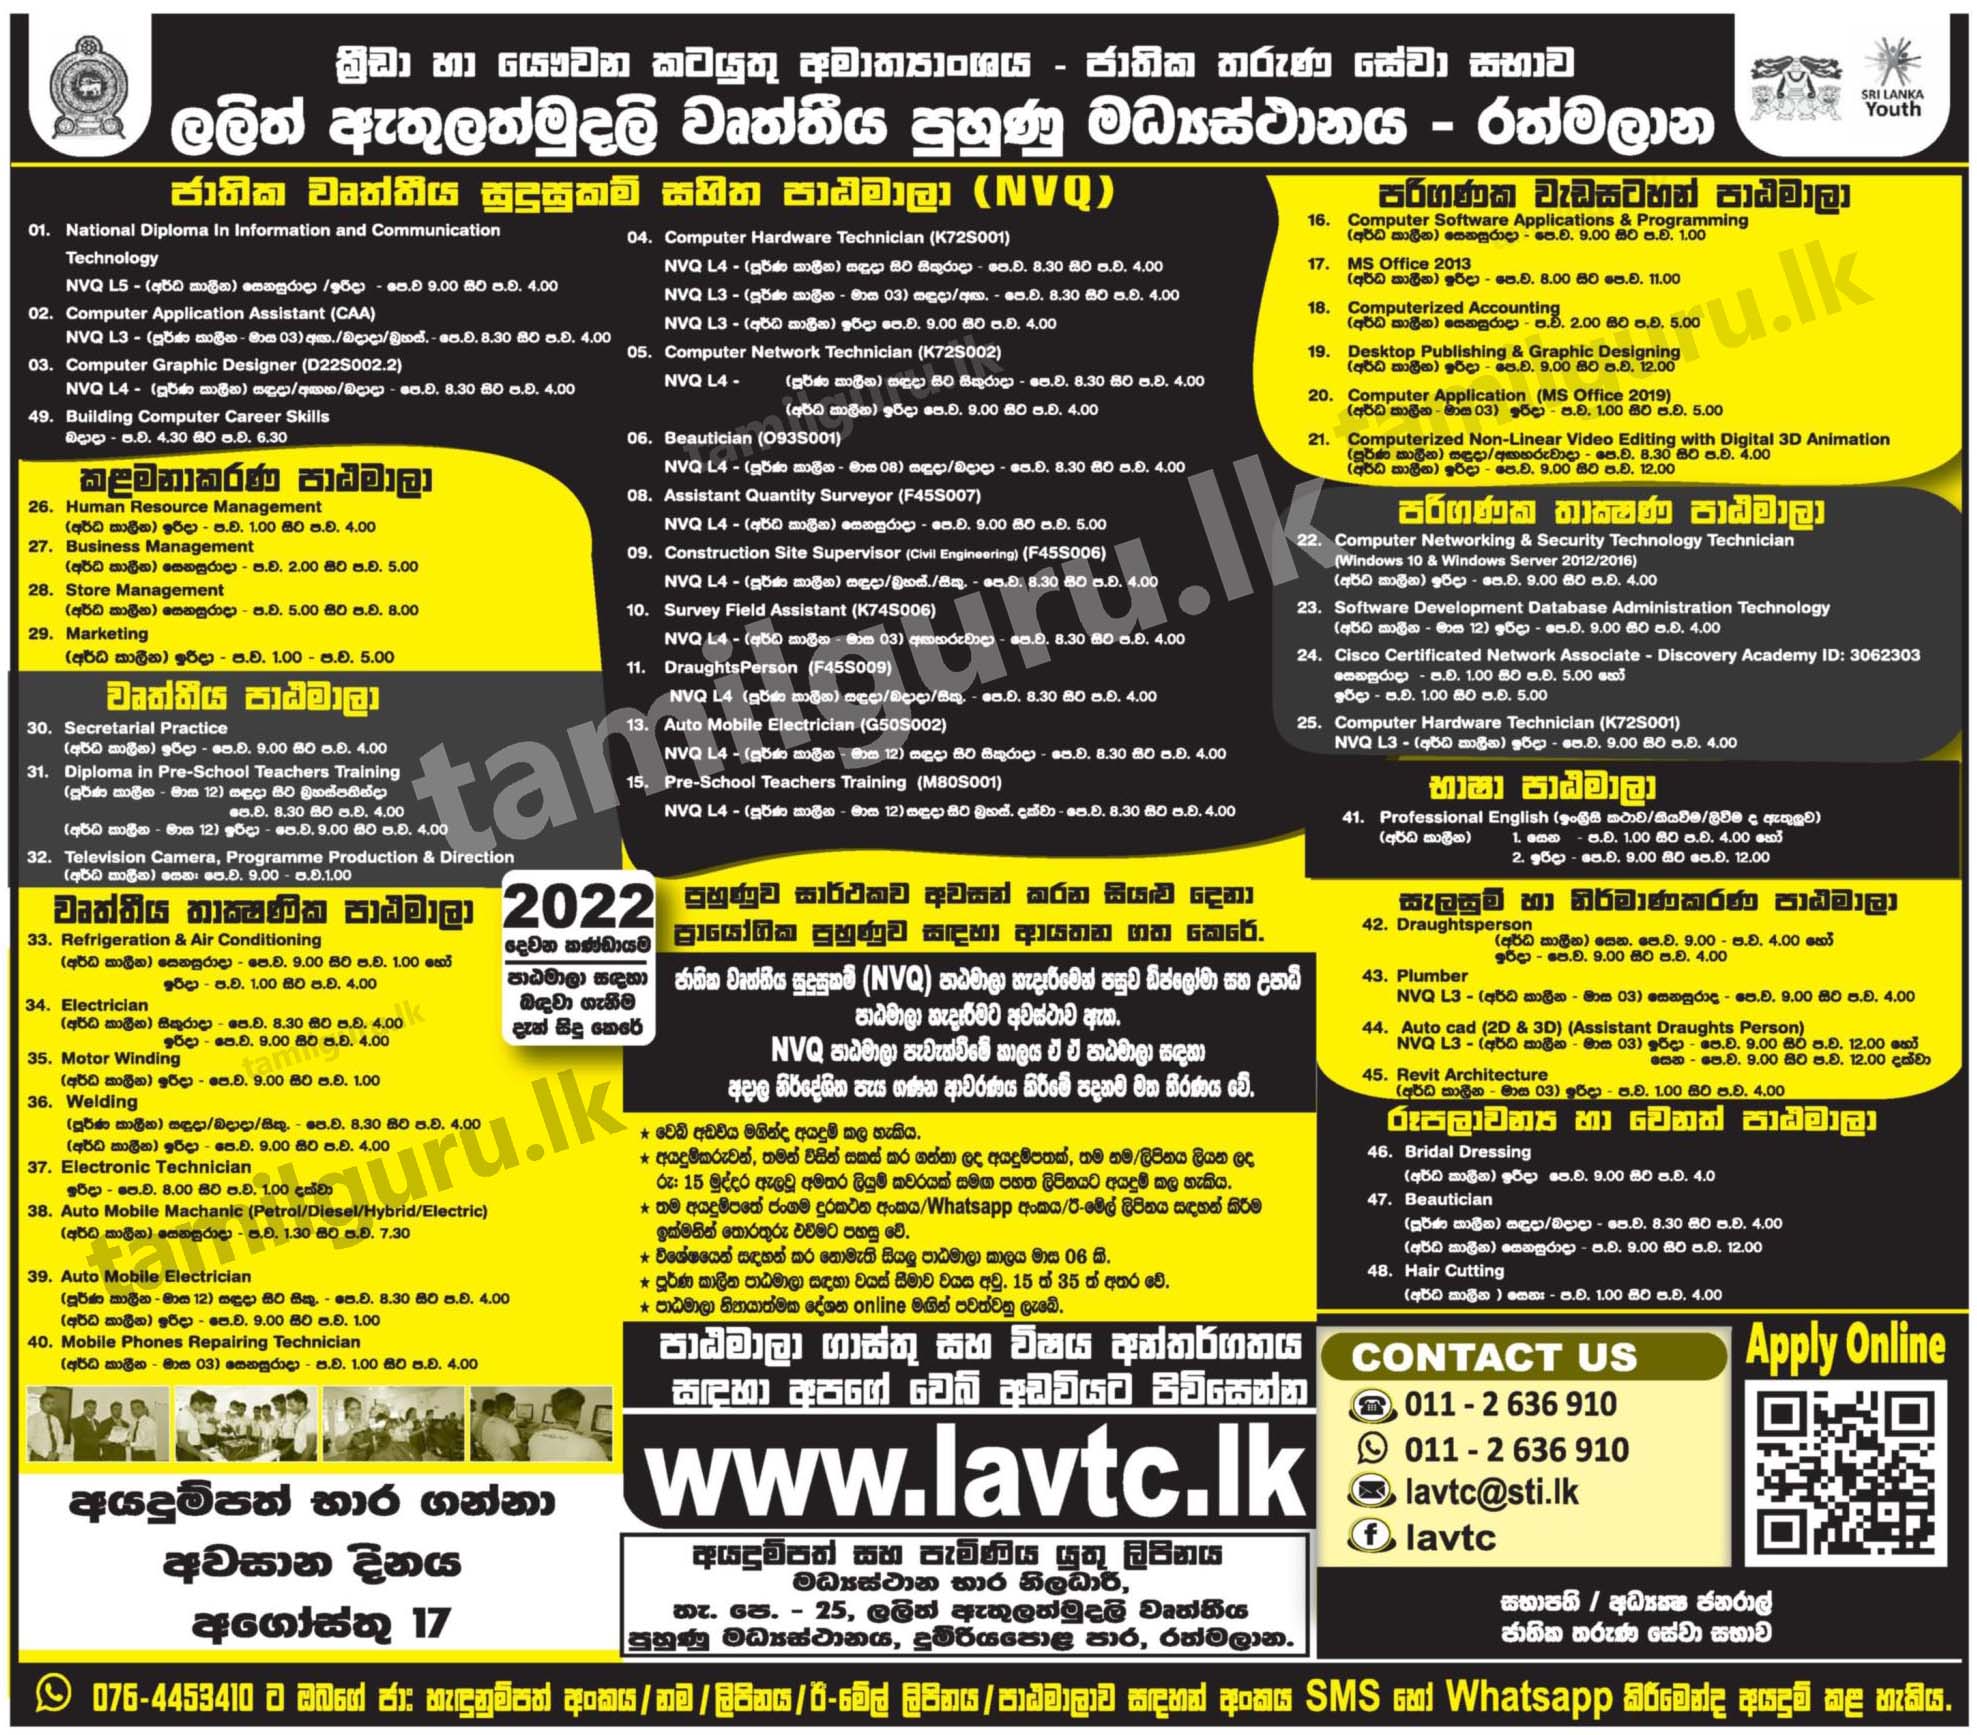 Calling Applications for Admission to Lalith Athulathmudali Vocational Training Center (LAVTC) Courses (2022 - Batch 02)